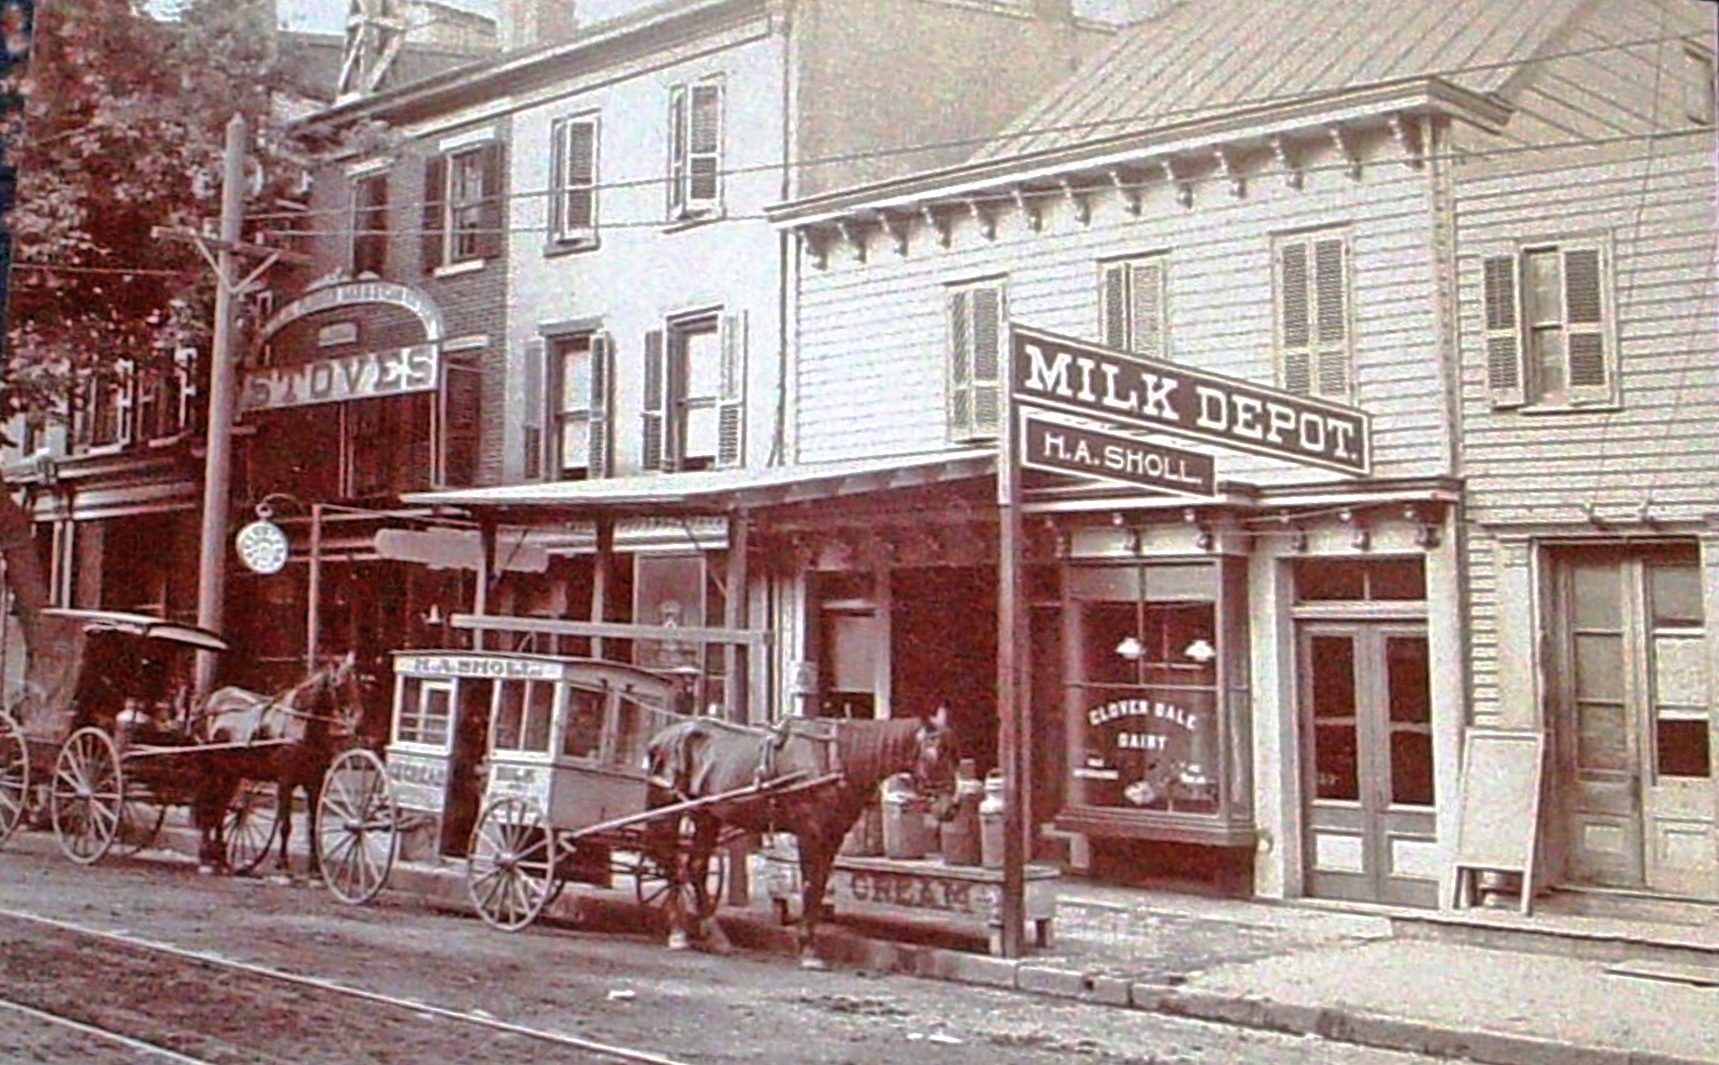 Bordentown - Horse andwagon at Milk Depot and other shops - undated